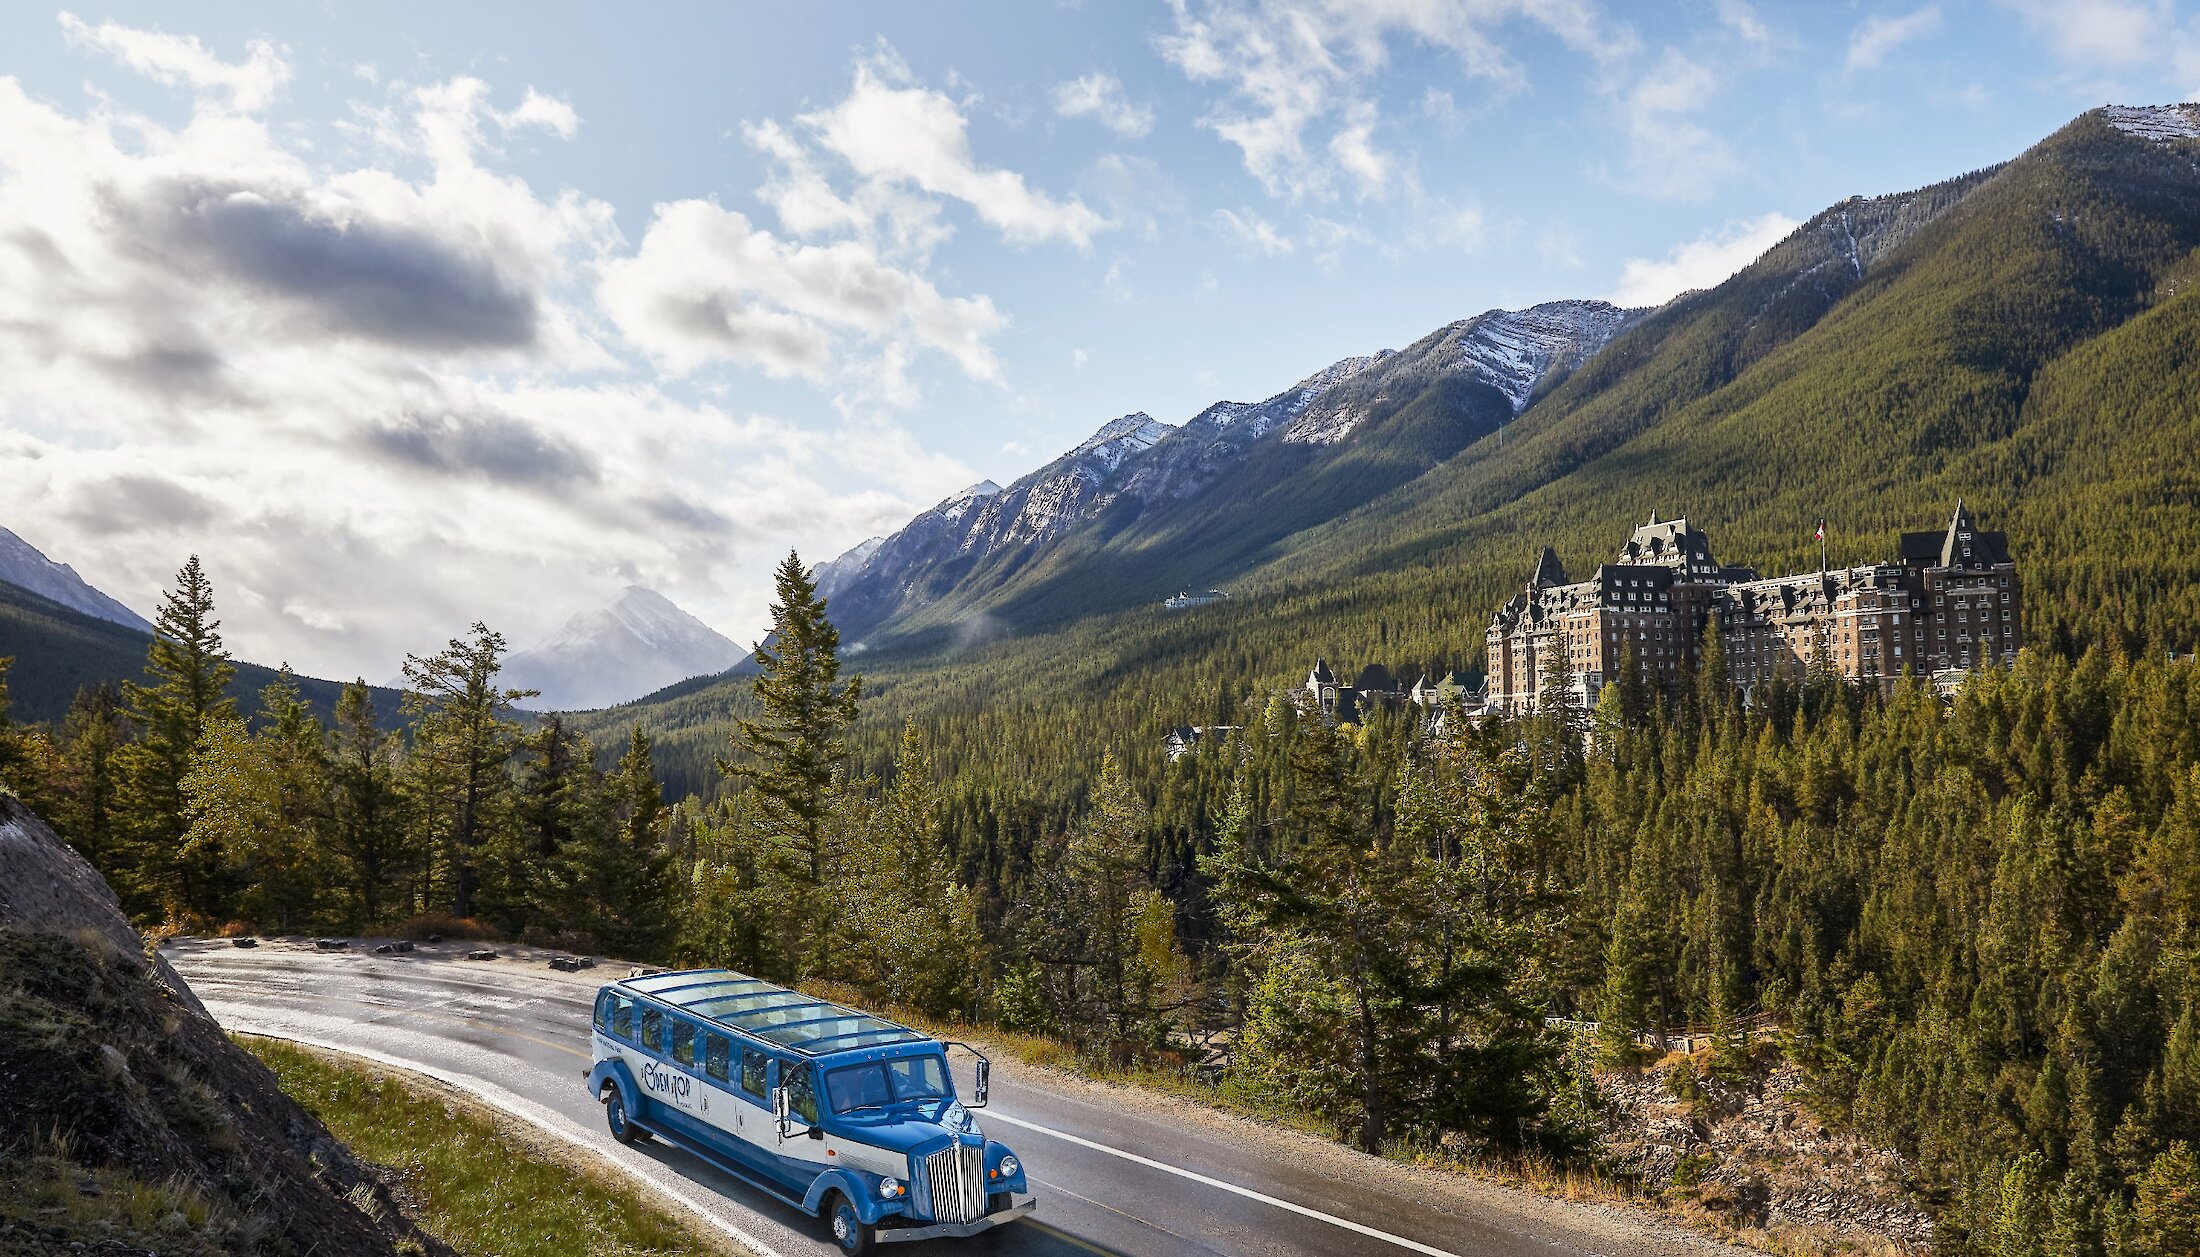 Open Top Tour with Fairmont Banff Springs Hotel